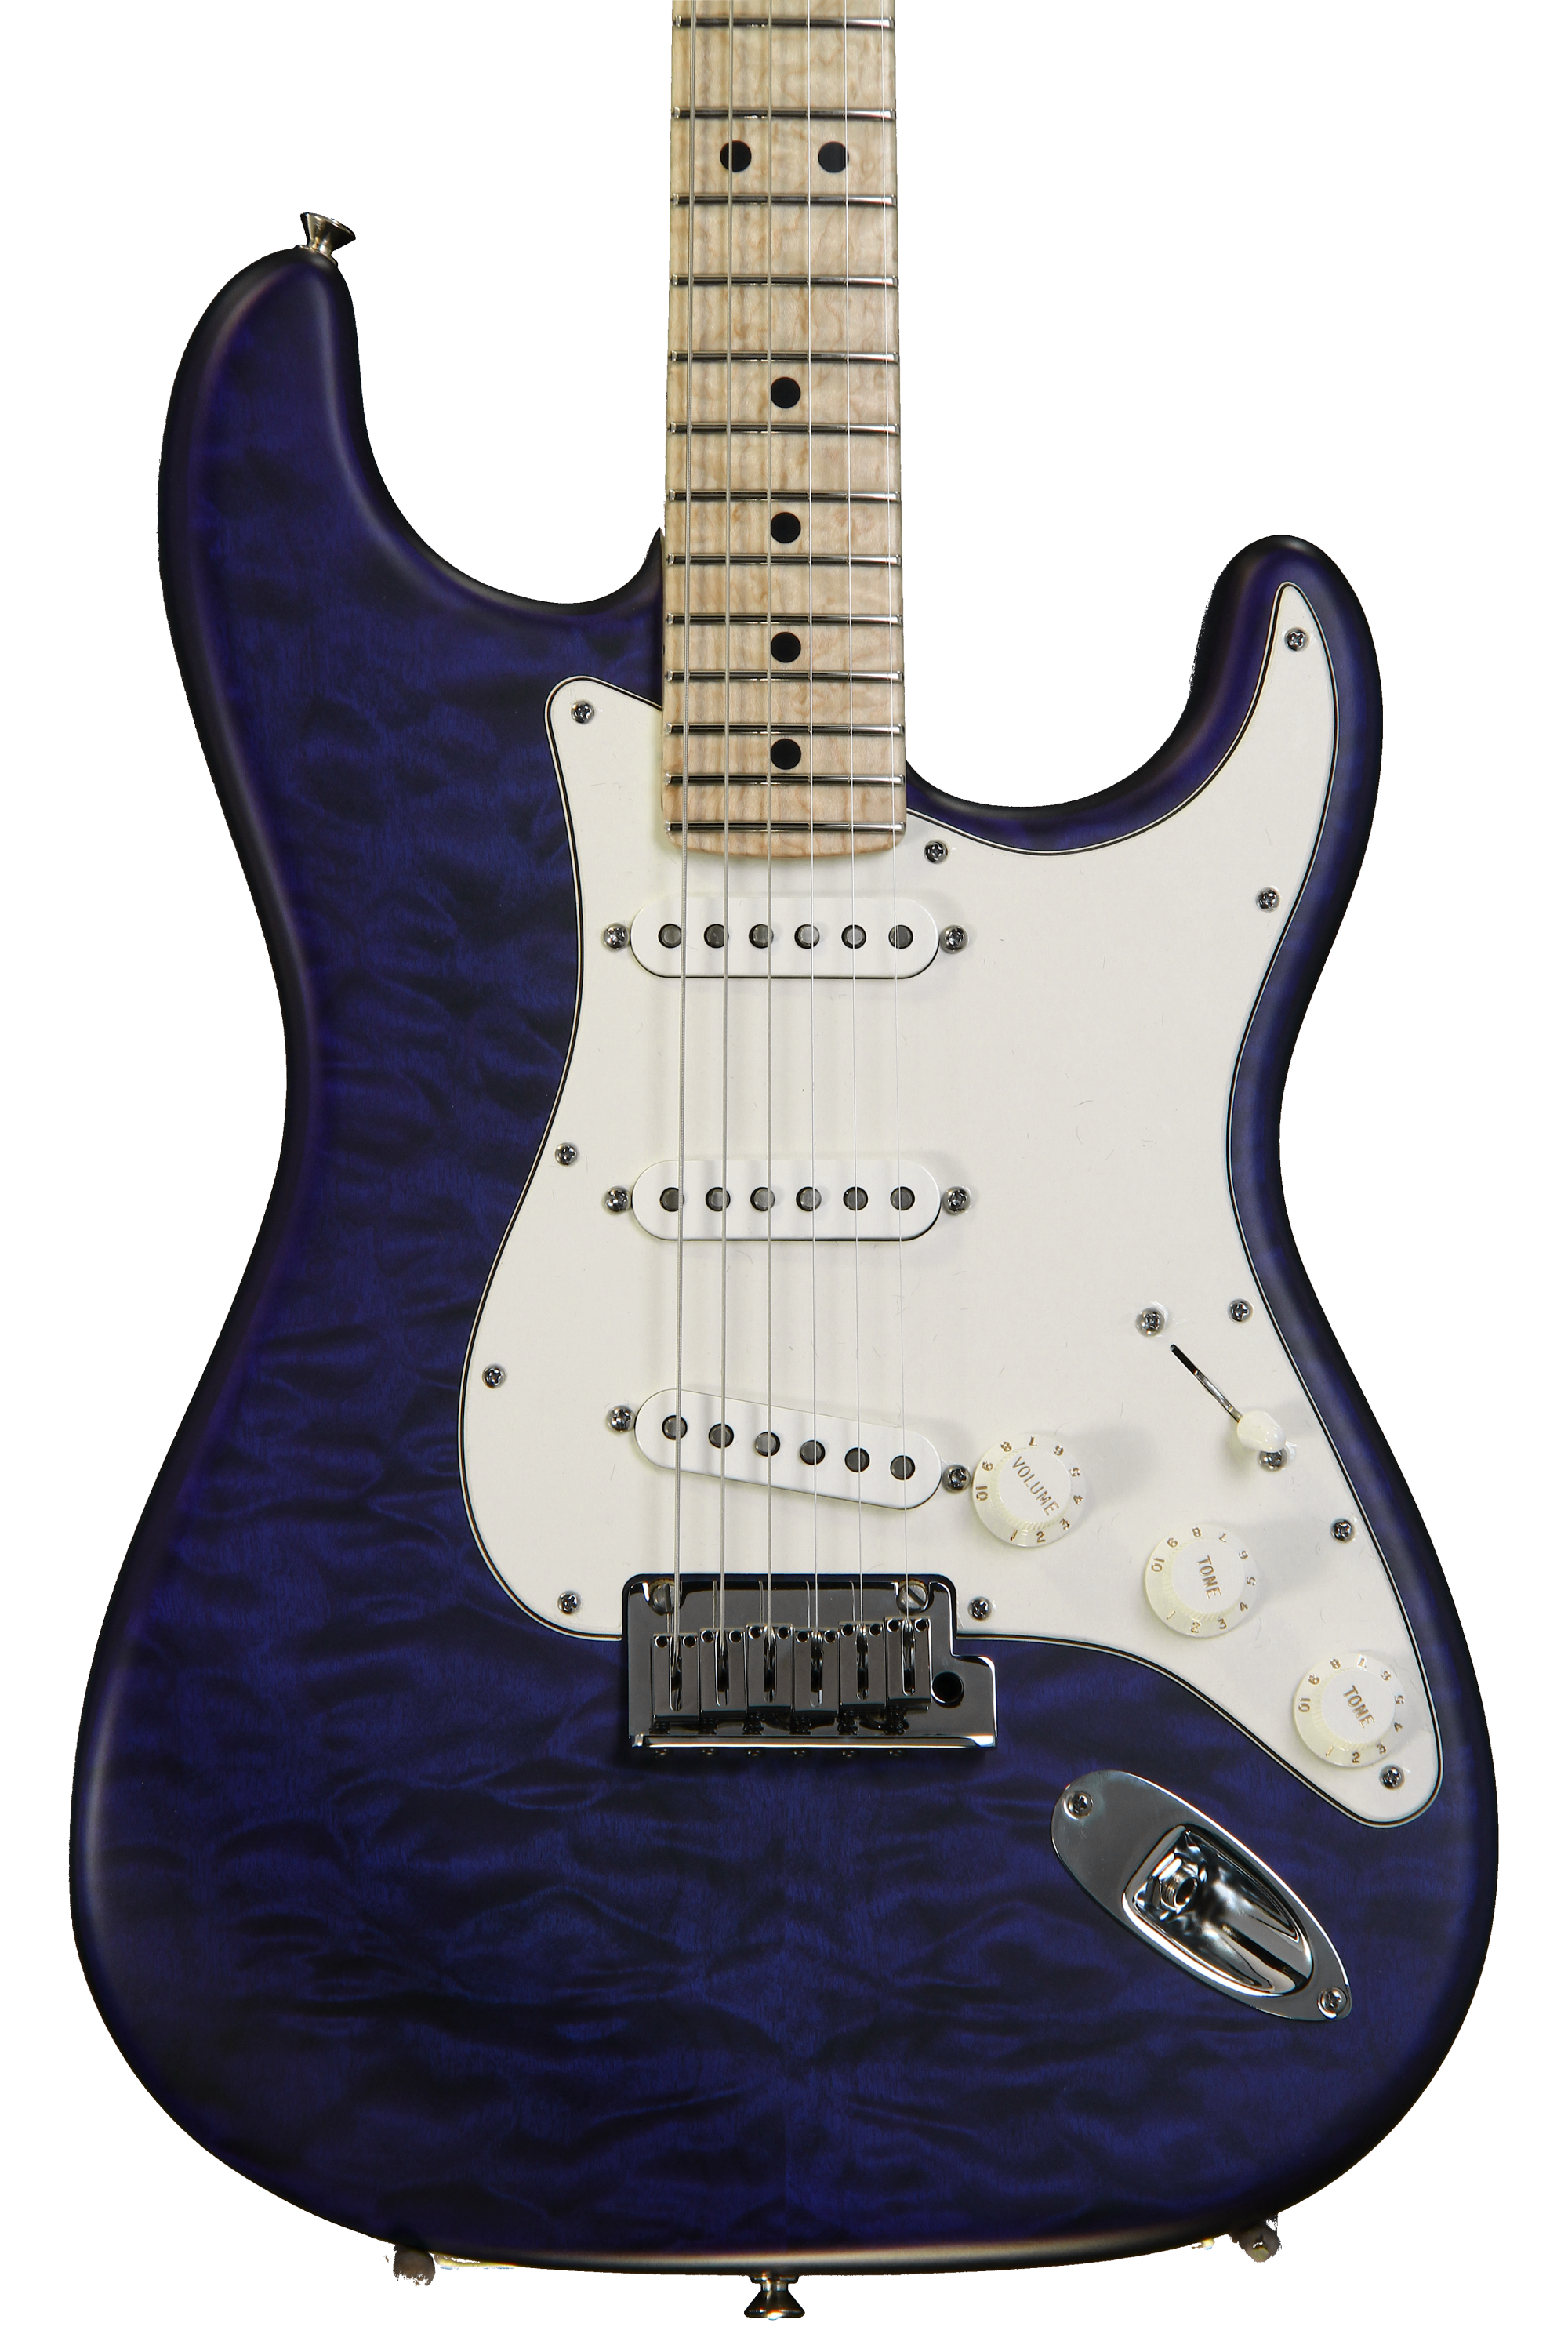 FENDER Fender Custom Shop Deluxe Stratocaster 2015 Satin Transparent Cobalt Blue With AAA Quilted Maple Top フェンダー カスタムショップ